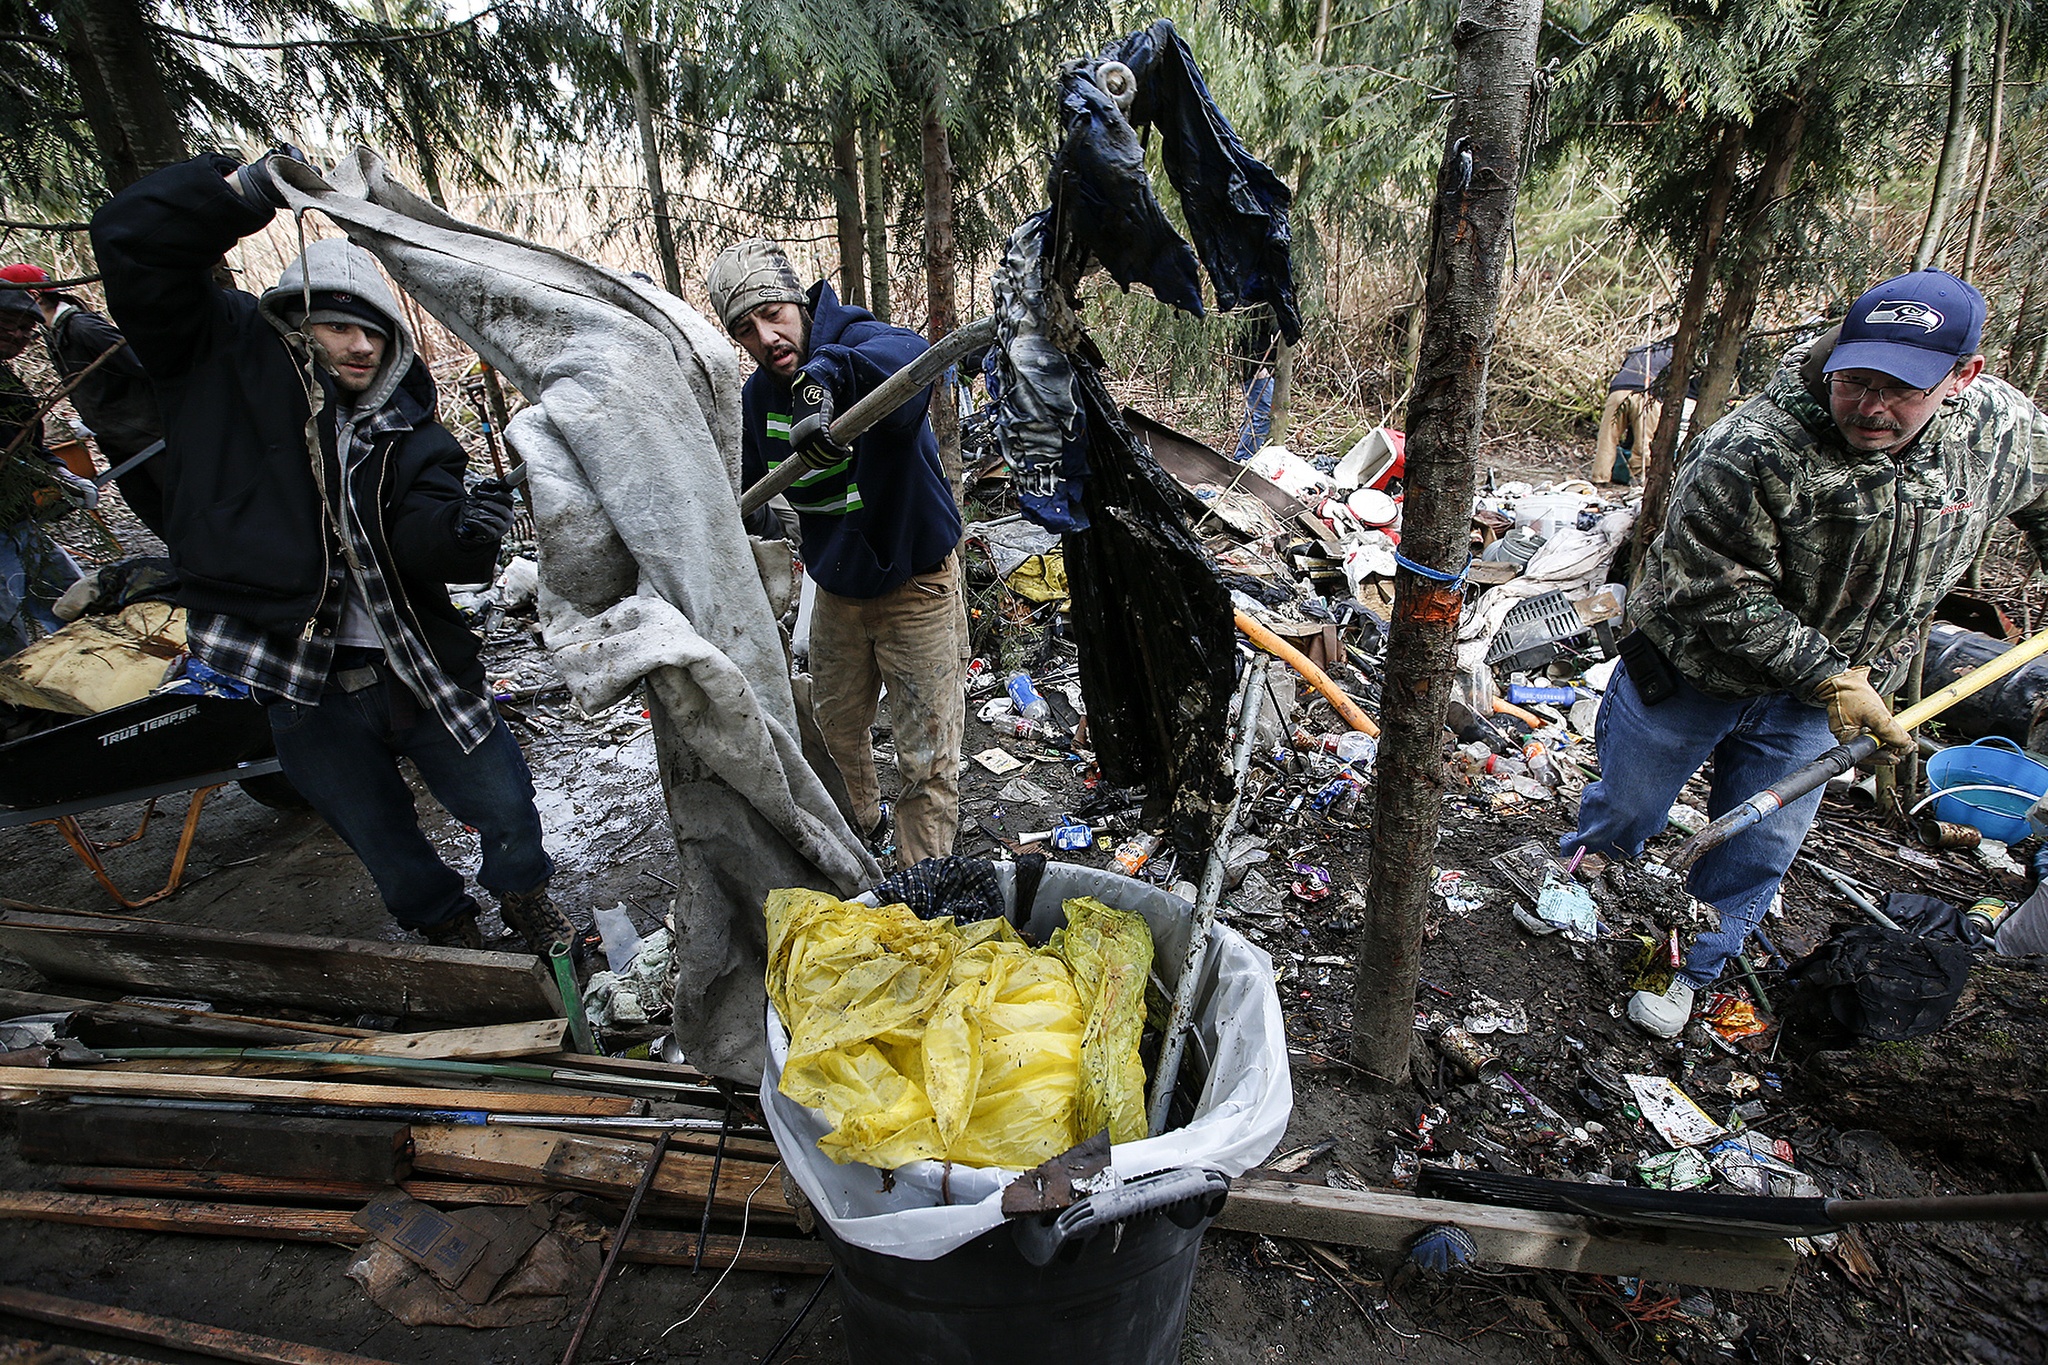 Volunteers (from left) Sean Holman, of Wenatchee, Shawn Quiacusan, of Renton, and Curtis Rodgers, of Lake Stevens, pile heaps of garbage into a container during a cleanup of homeless encampments along the Skykomish River near Monroe on Saturday. The cleanup was organized by RiverJunky, a group founded in late 2016 that cleans up trash along waterways. (Ian Terry / The Herald)